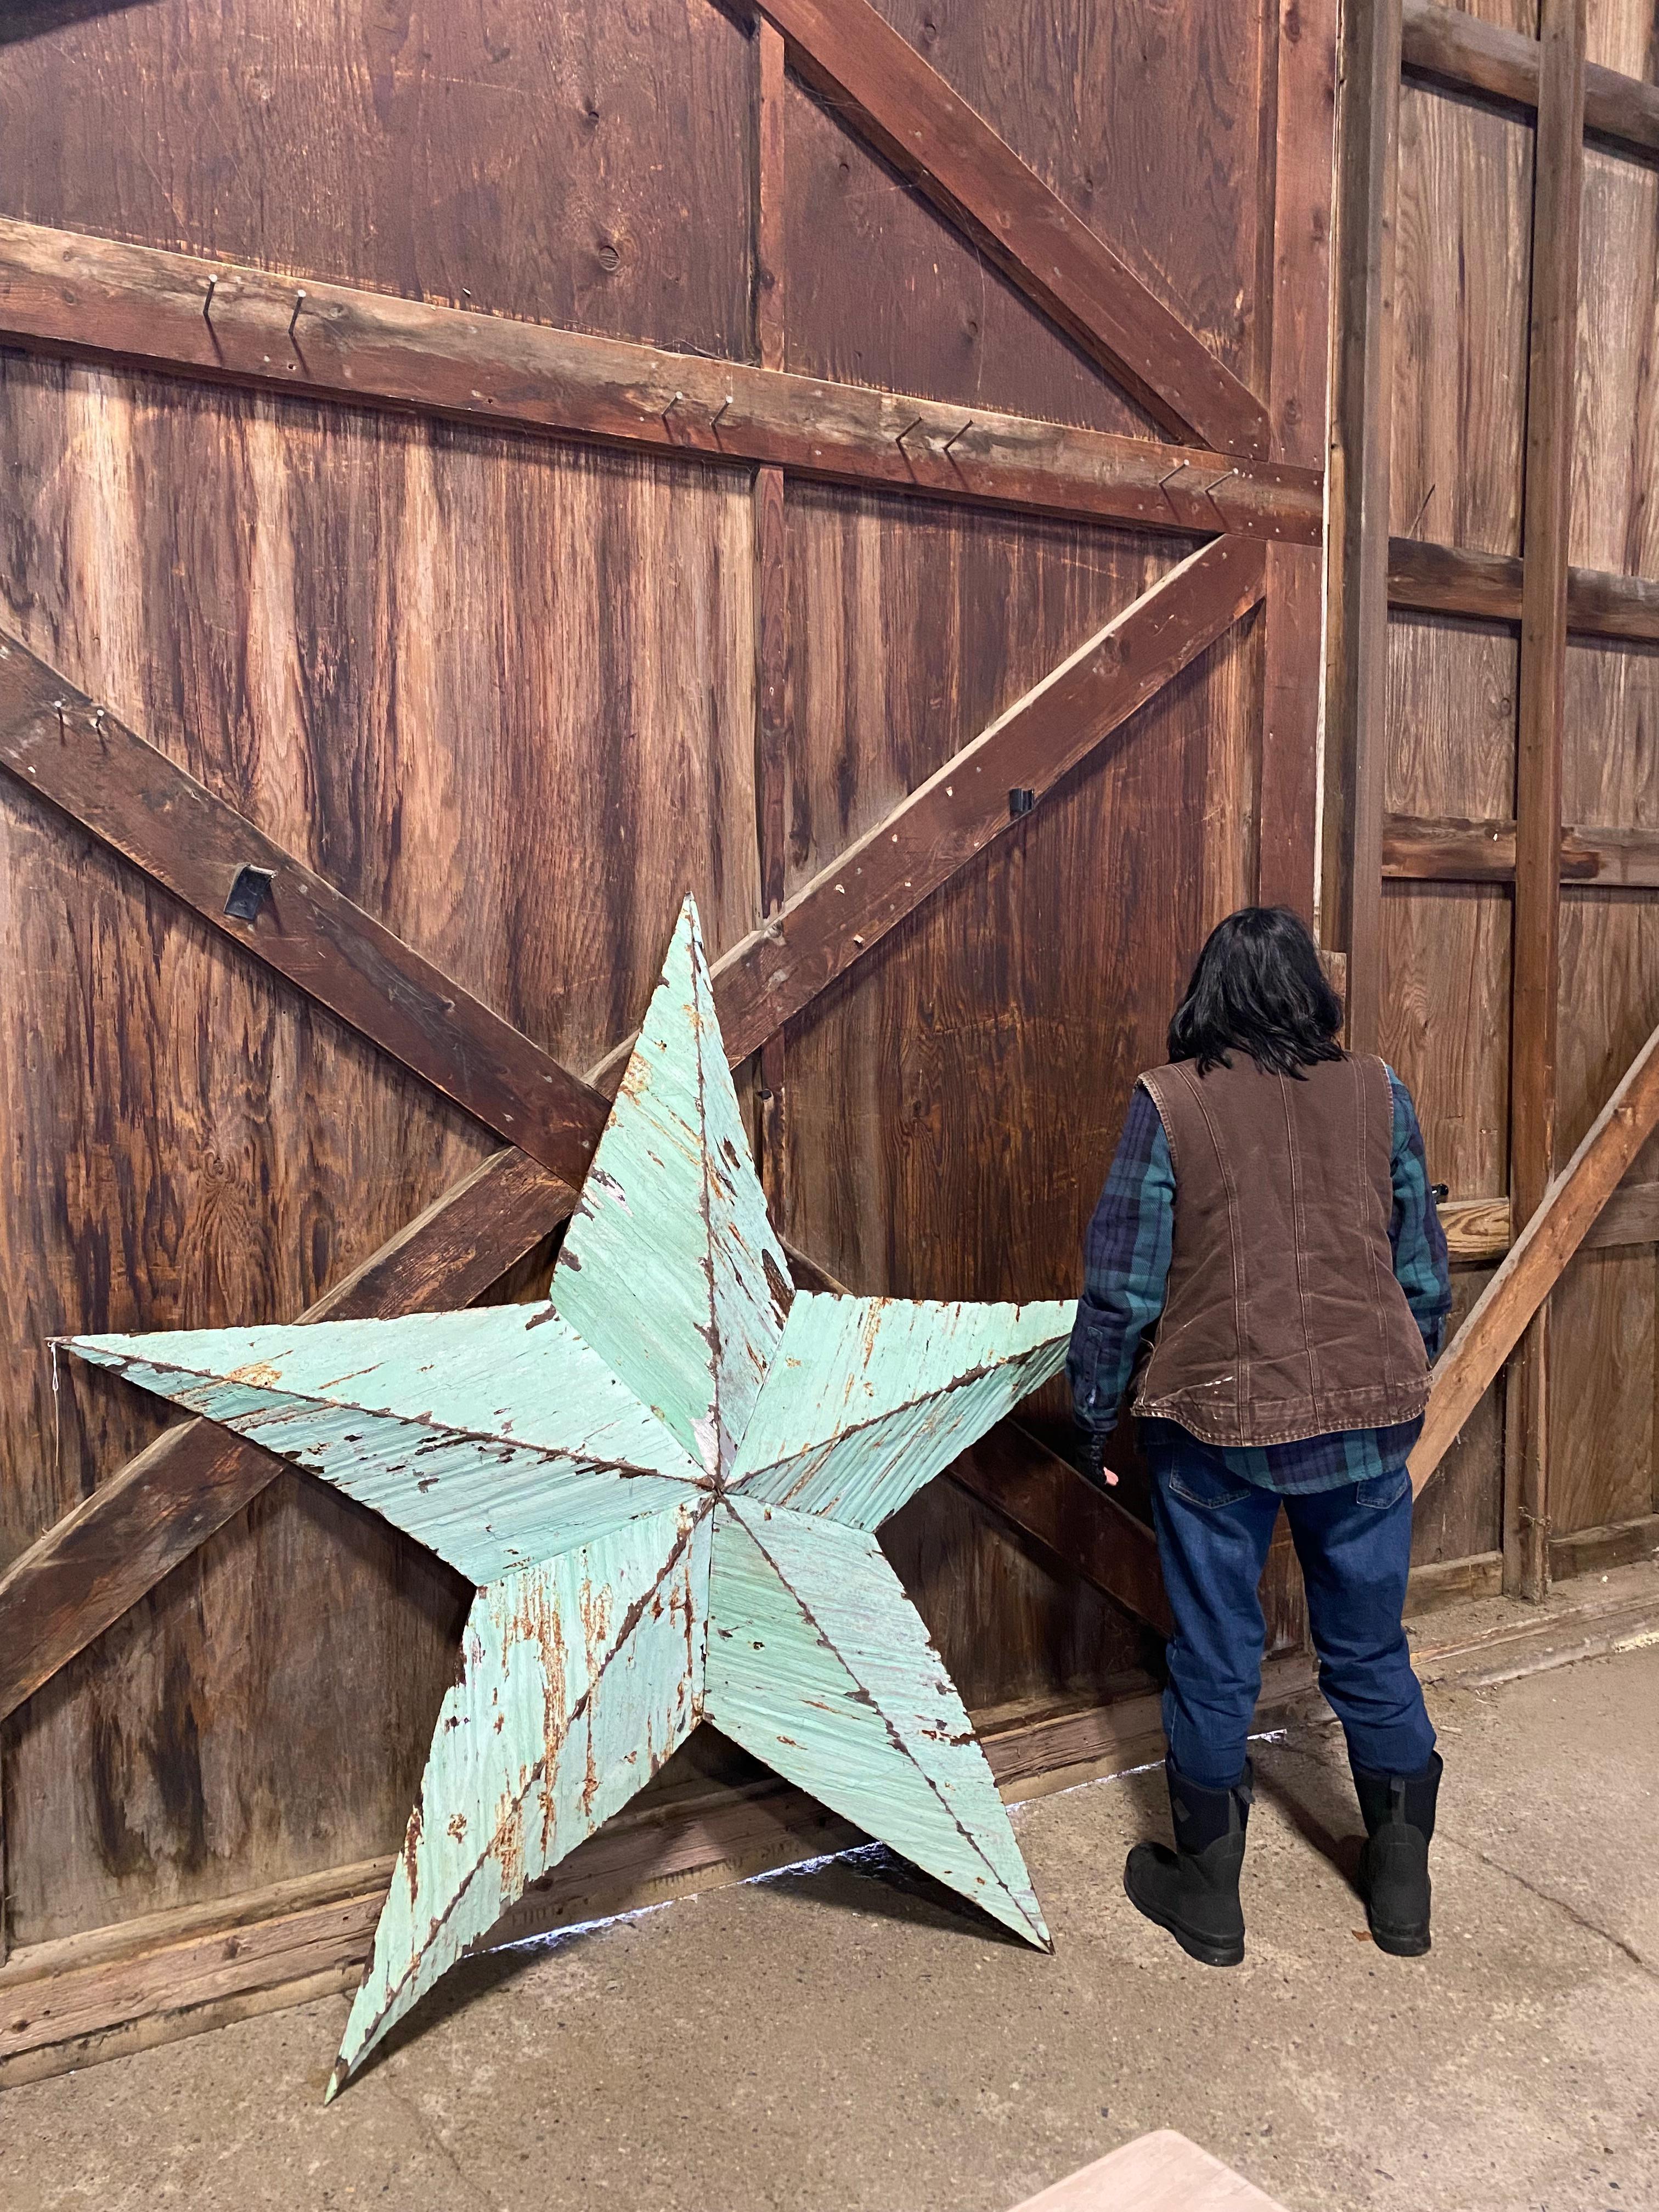 Really lovely aged patina on this huge metal barn star from the early 1900s. Would look great indoors or outdoors as a decorative architectural element!
#5732